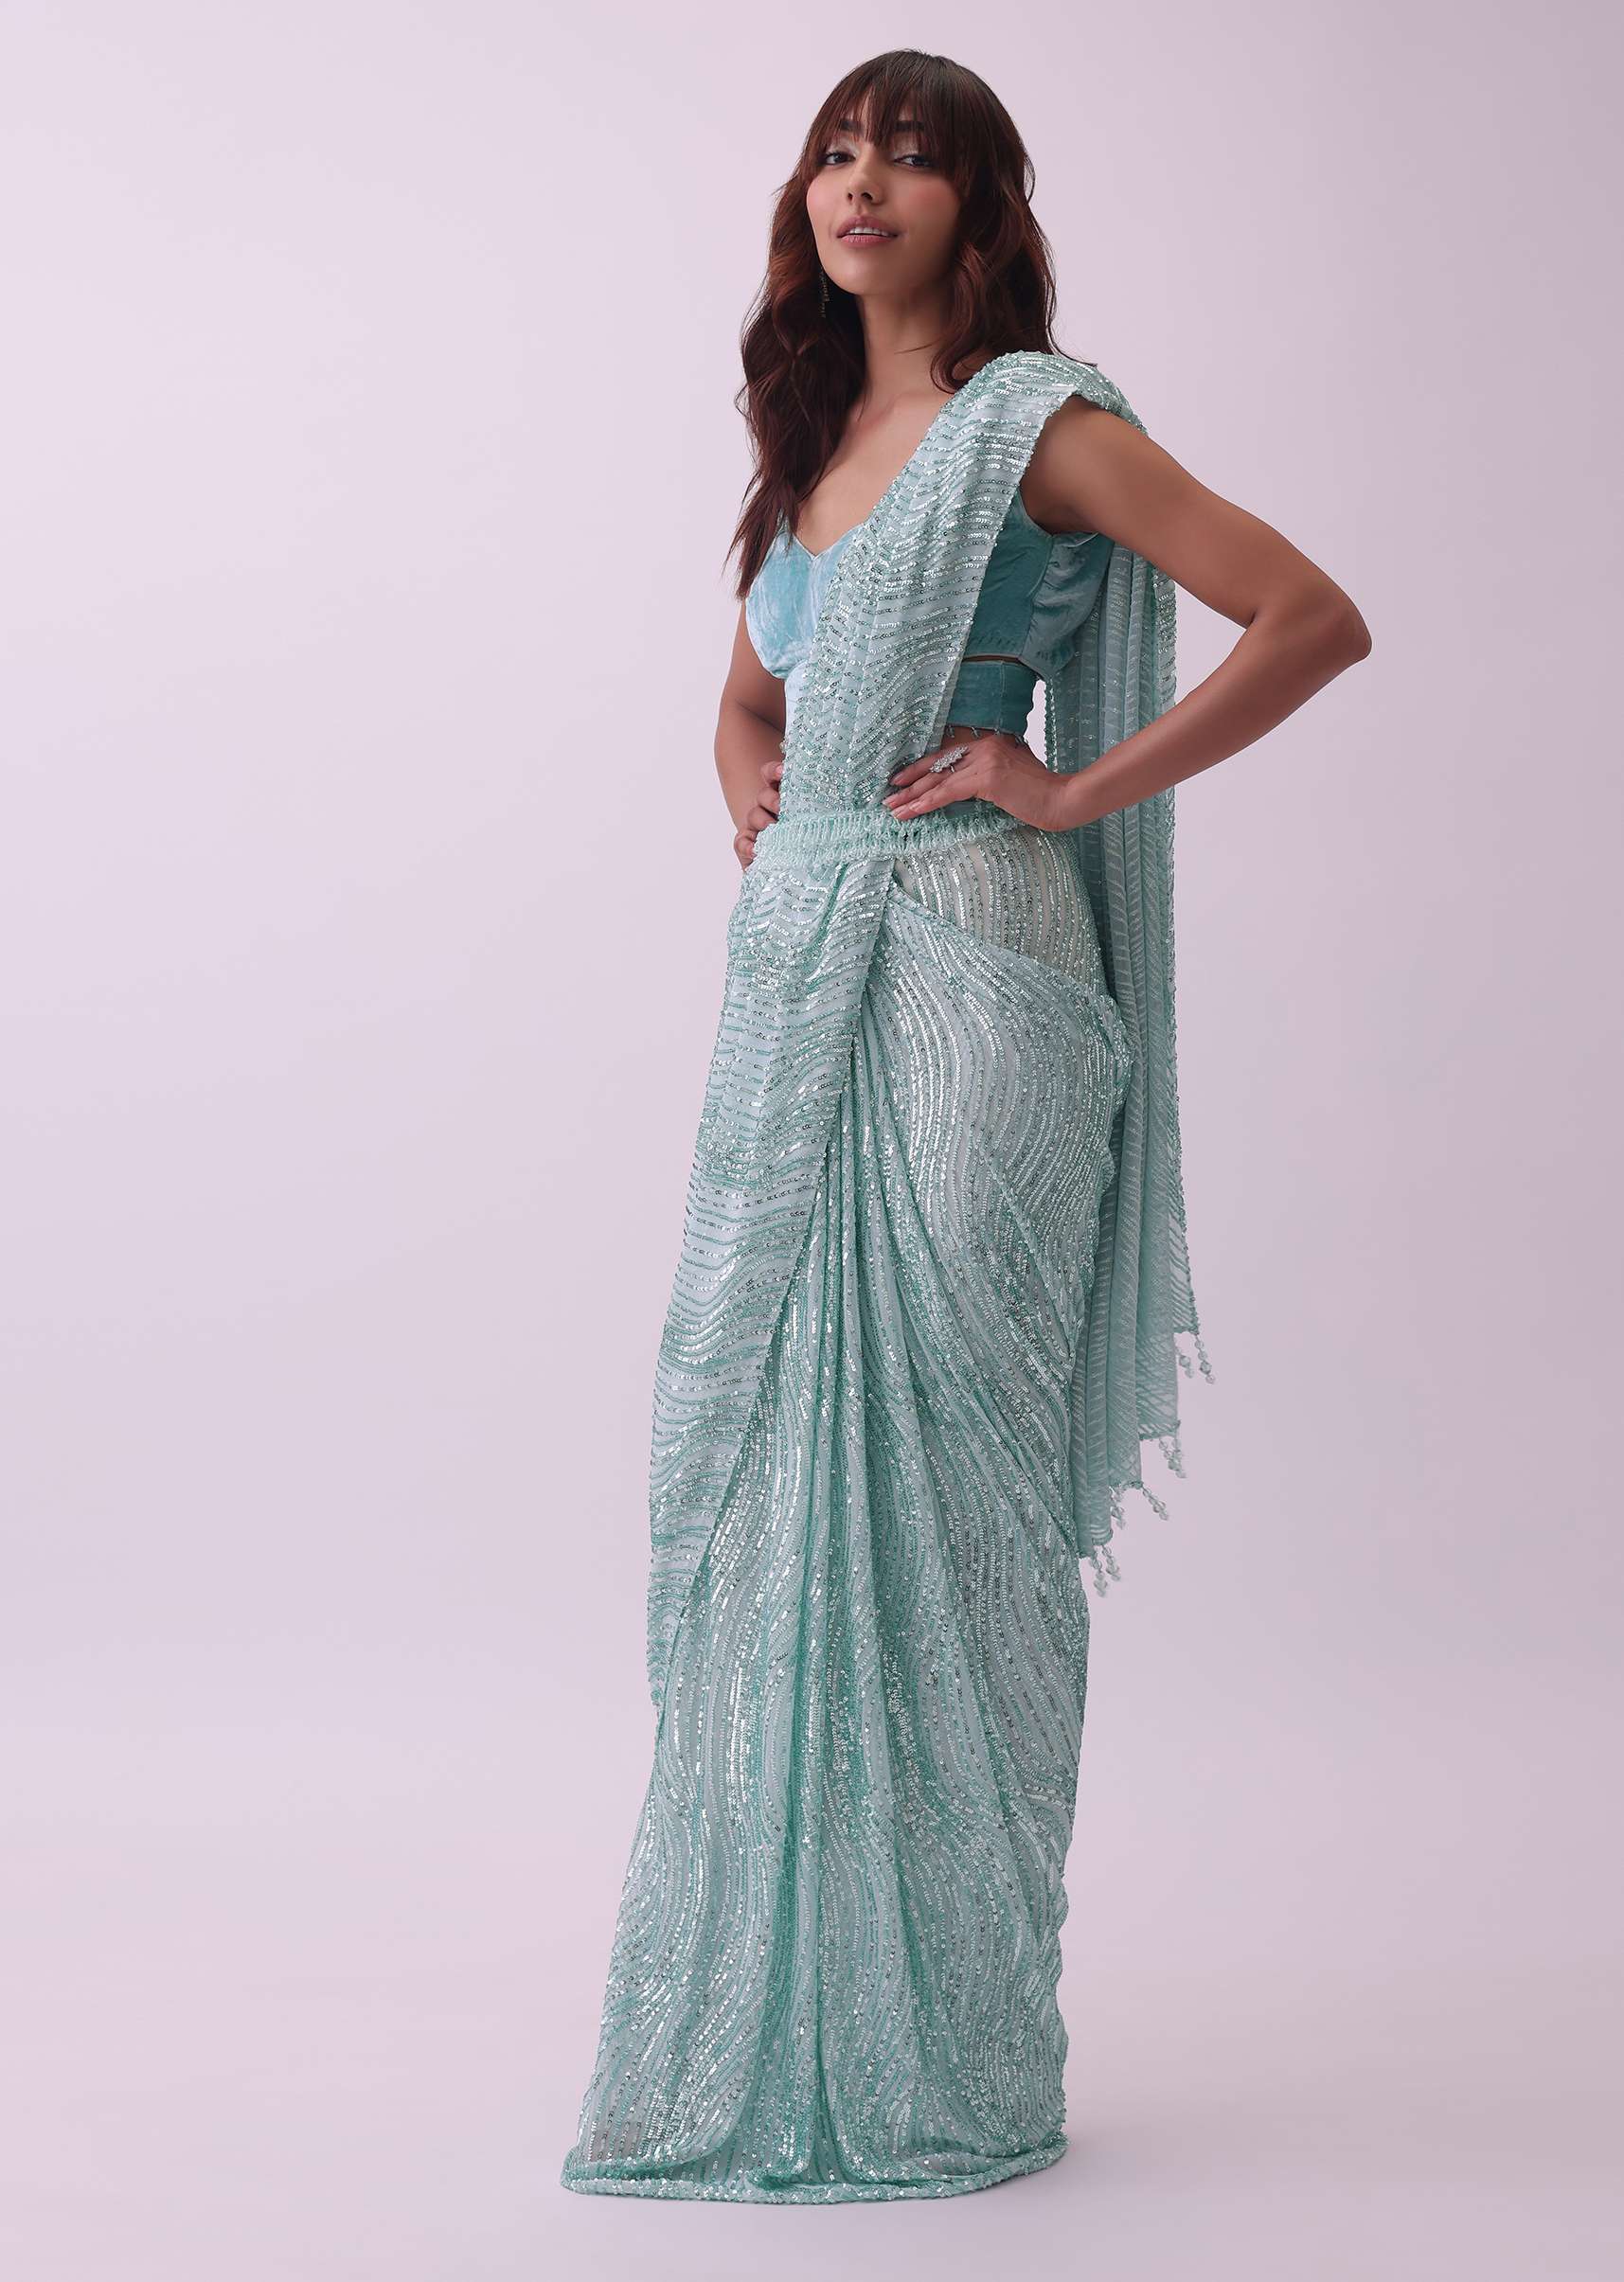 Aqua Blue Saree And Stitched Velvet Blouse With Hanging Crystals